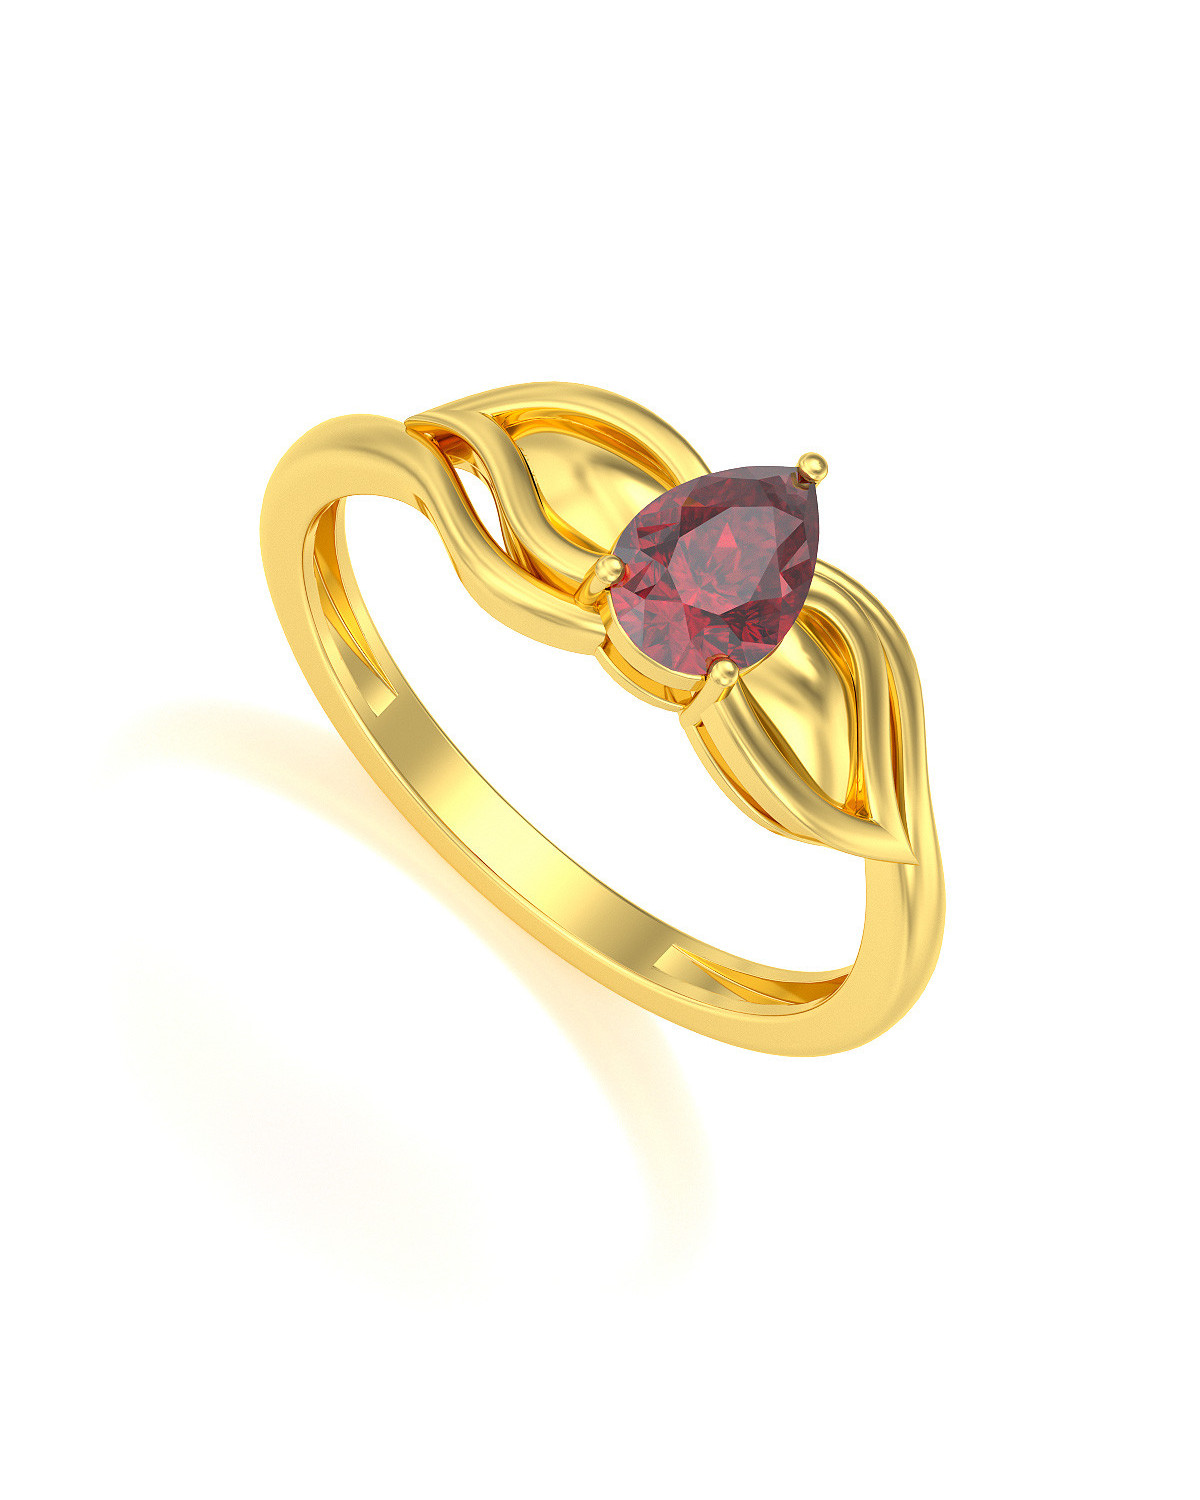 Bague Solitaire Or Jaune Rubis 1.92grs